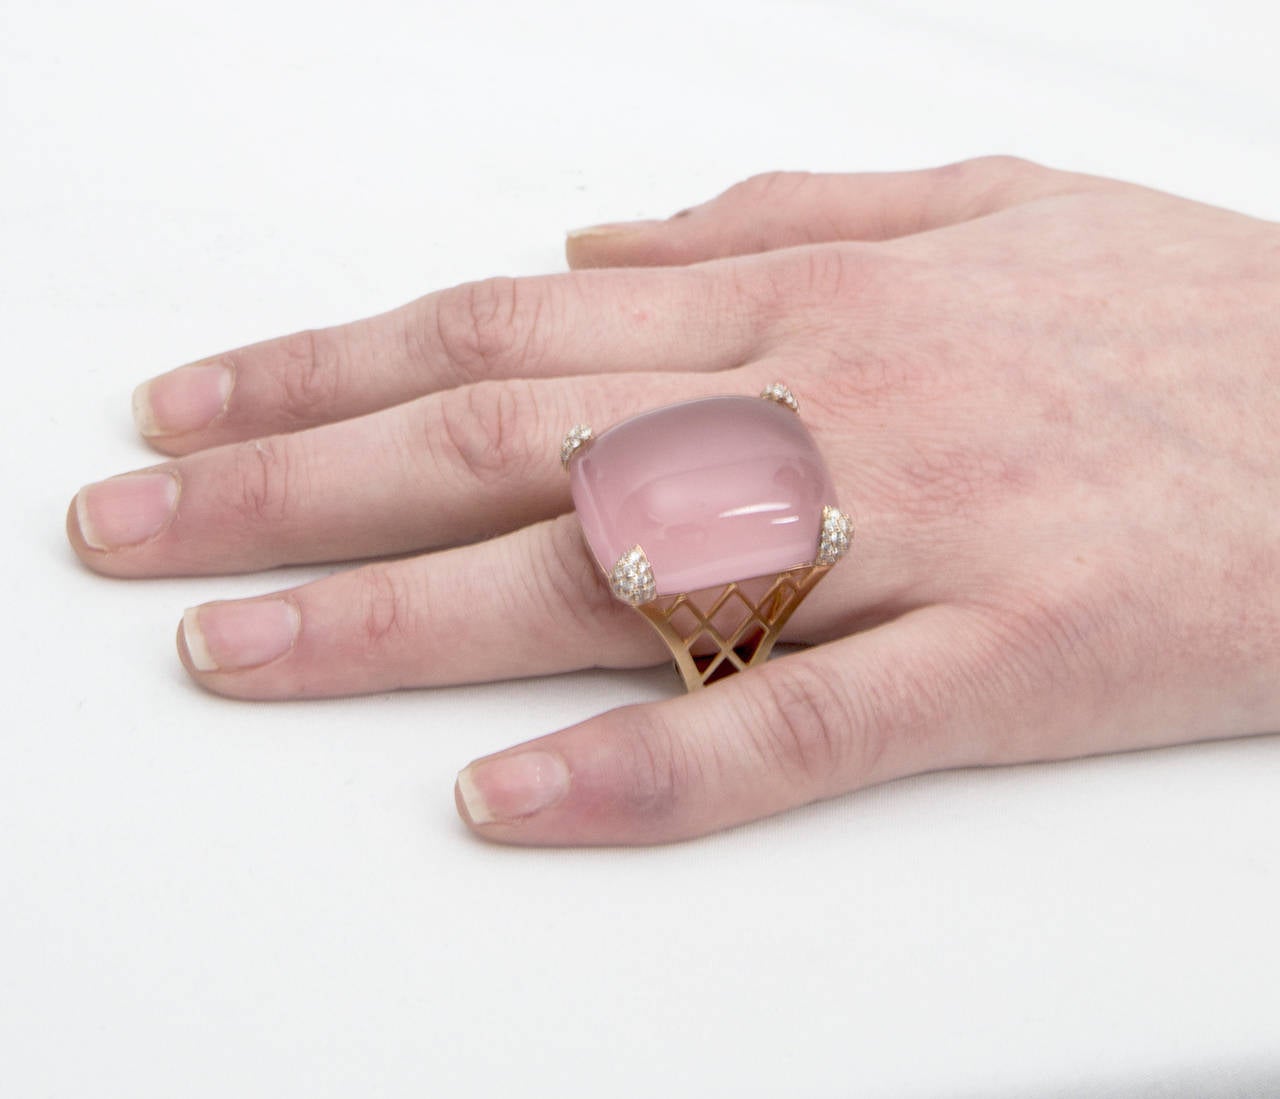 65 Carat Rose Quartz Diamond Gold Statement Cocktail Ring Estate Fine Jewelry In Excellent Condition For Sale In Montreal, QC